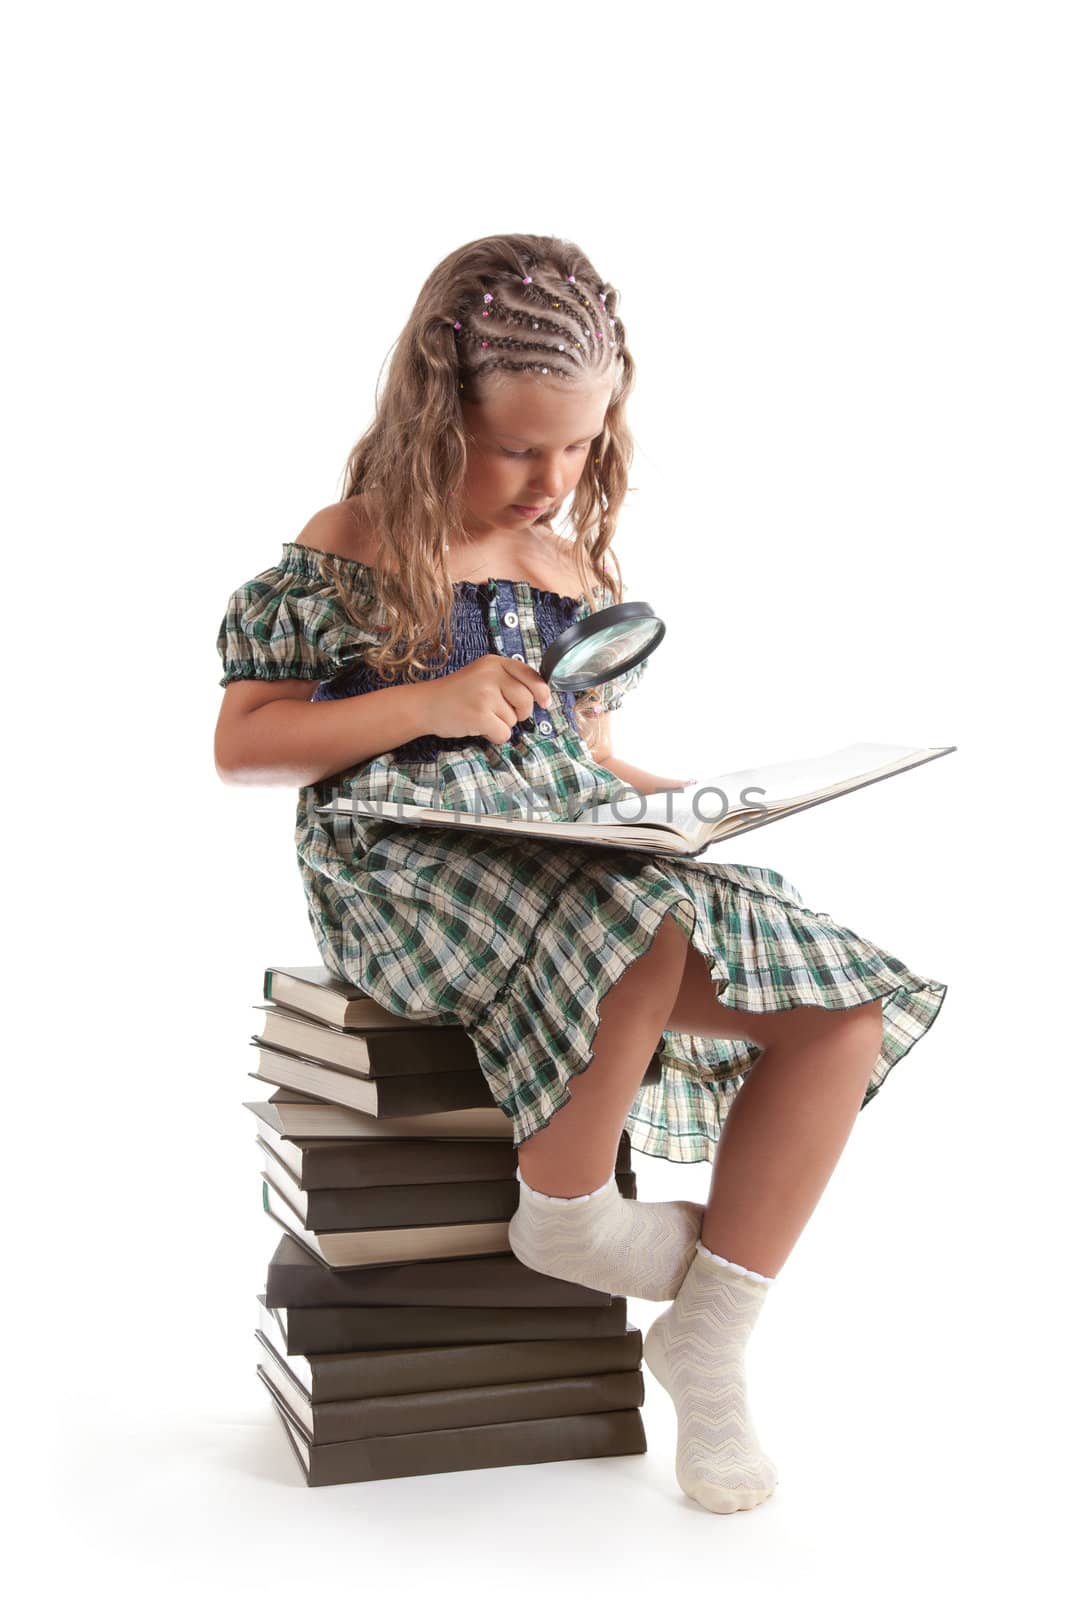 Little girl with magnifying glass reading book  by Elisanth